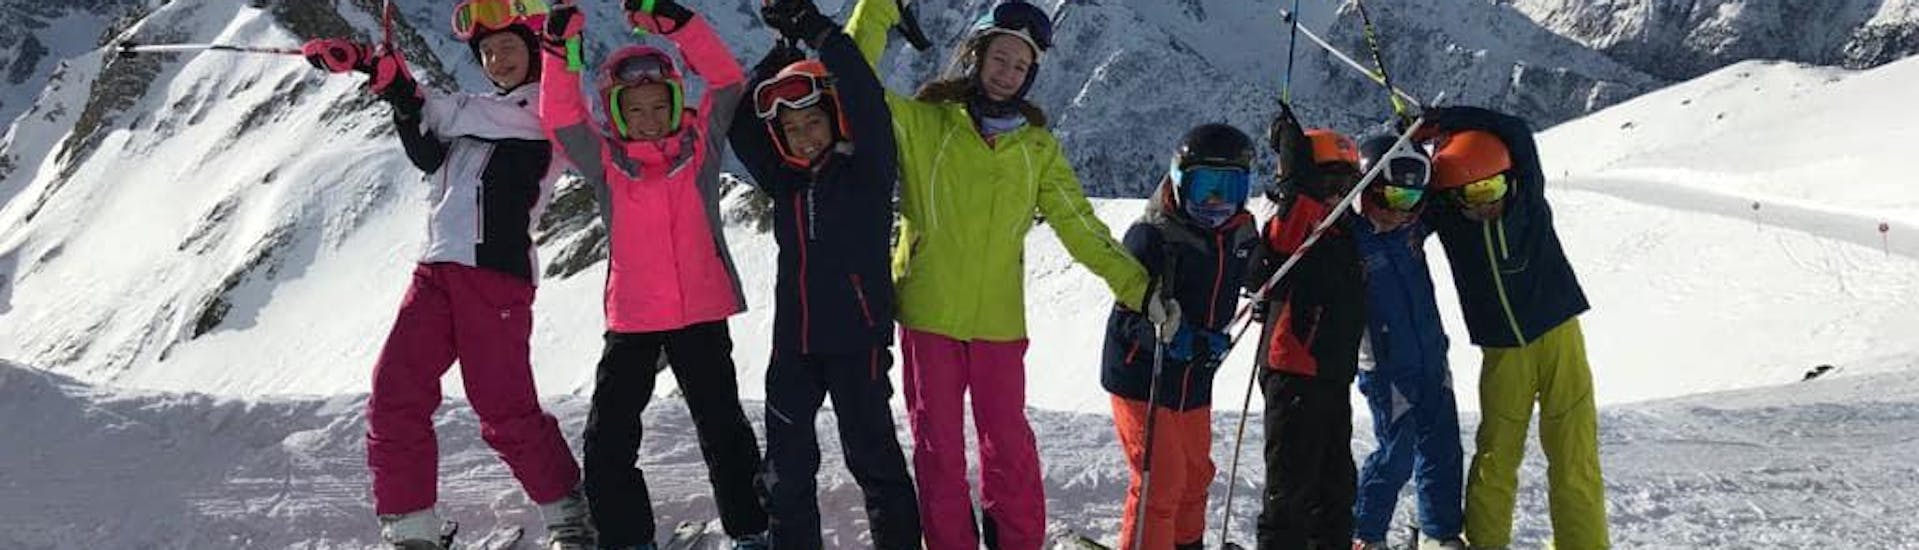 Happy participants in Pontedilegno during one of the kids ski lessons for beginners.